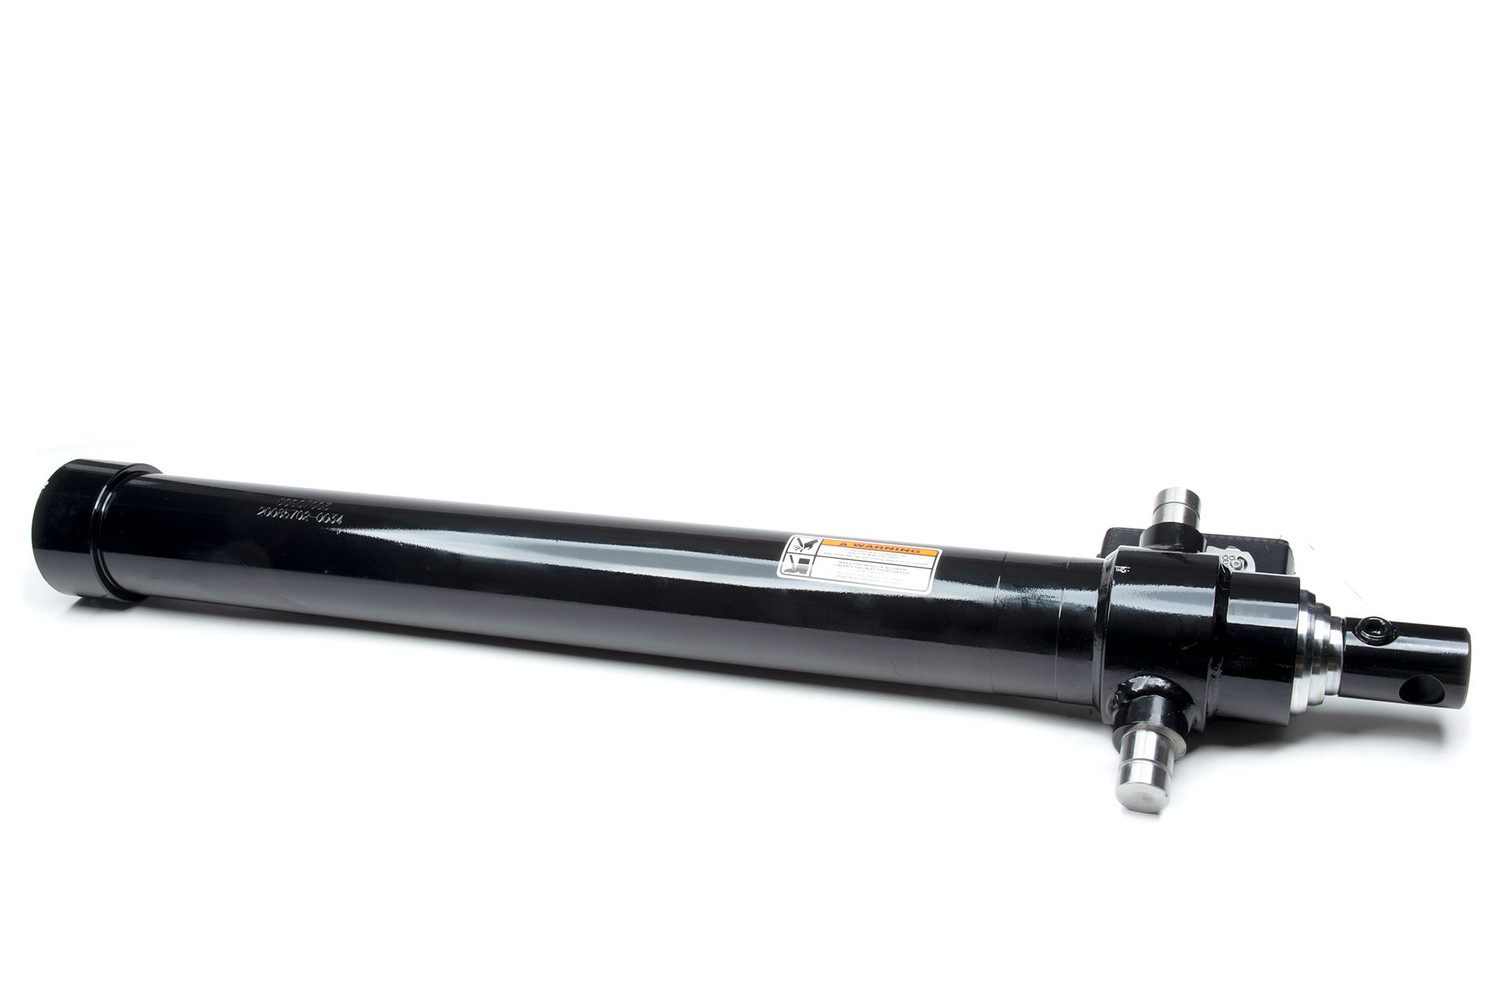 MAXIM 7 TON TELESCOPIC HYDRAULIC CYLINDER: 3 STAGE, 108" STROKE - 1 3/4", 2.375", 3" SECTIONS